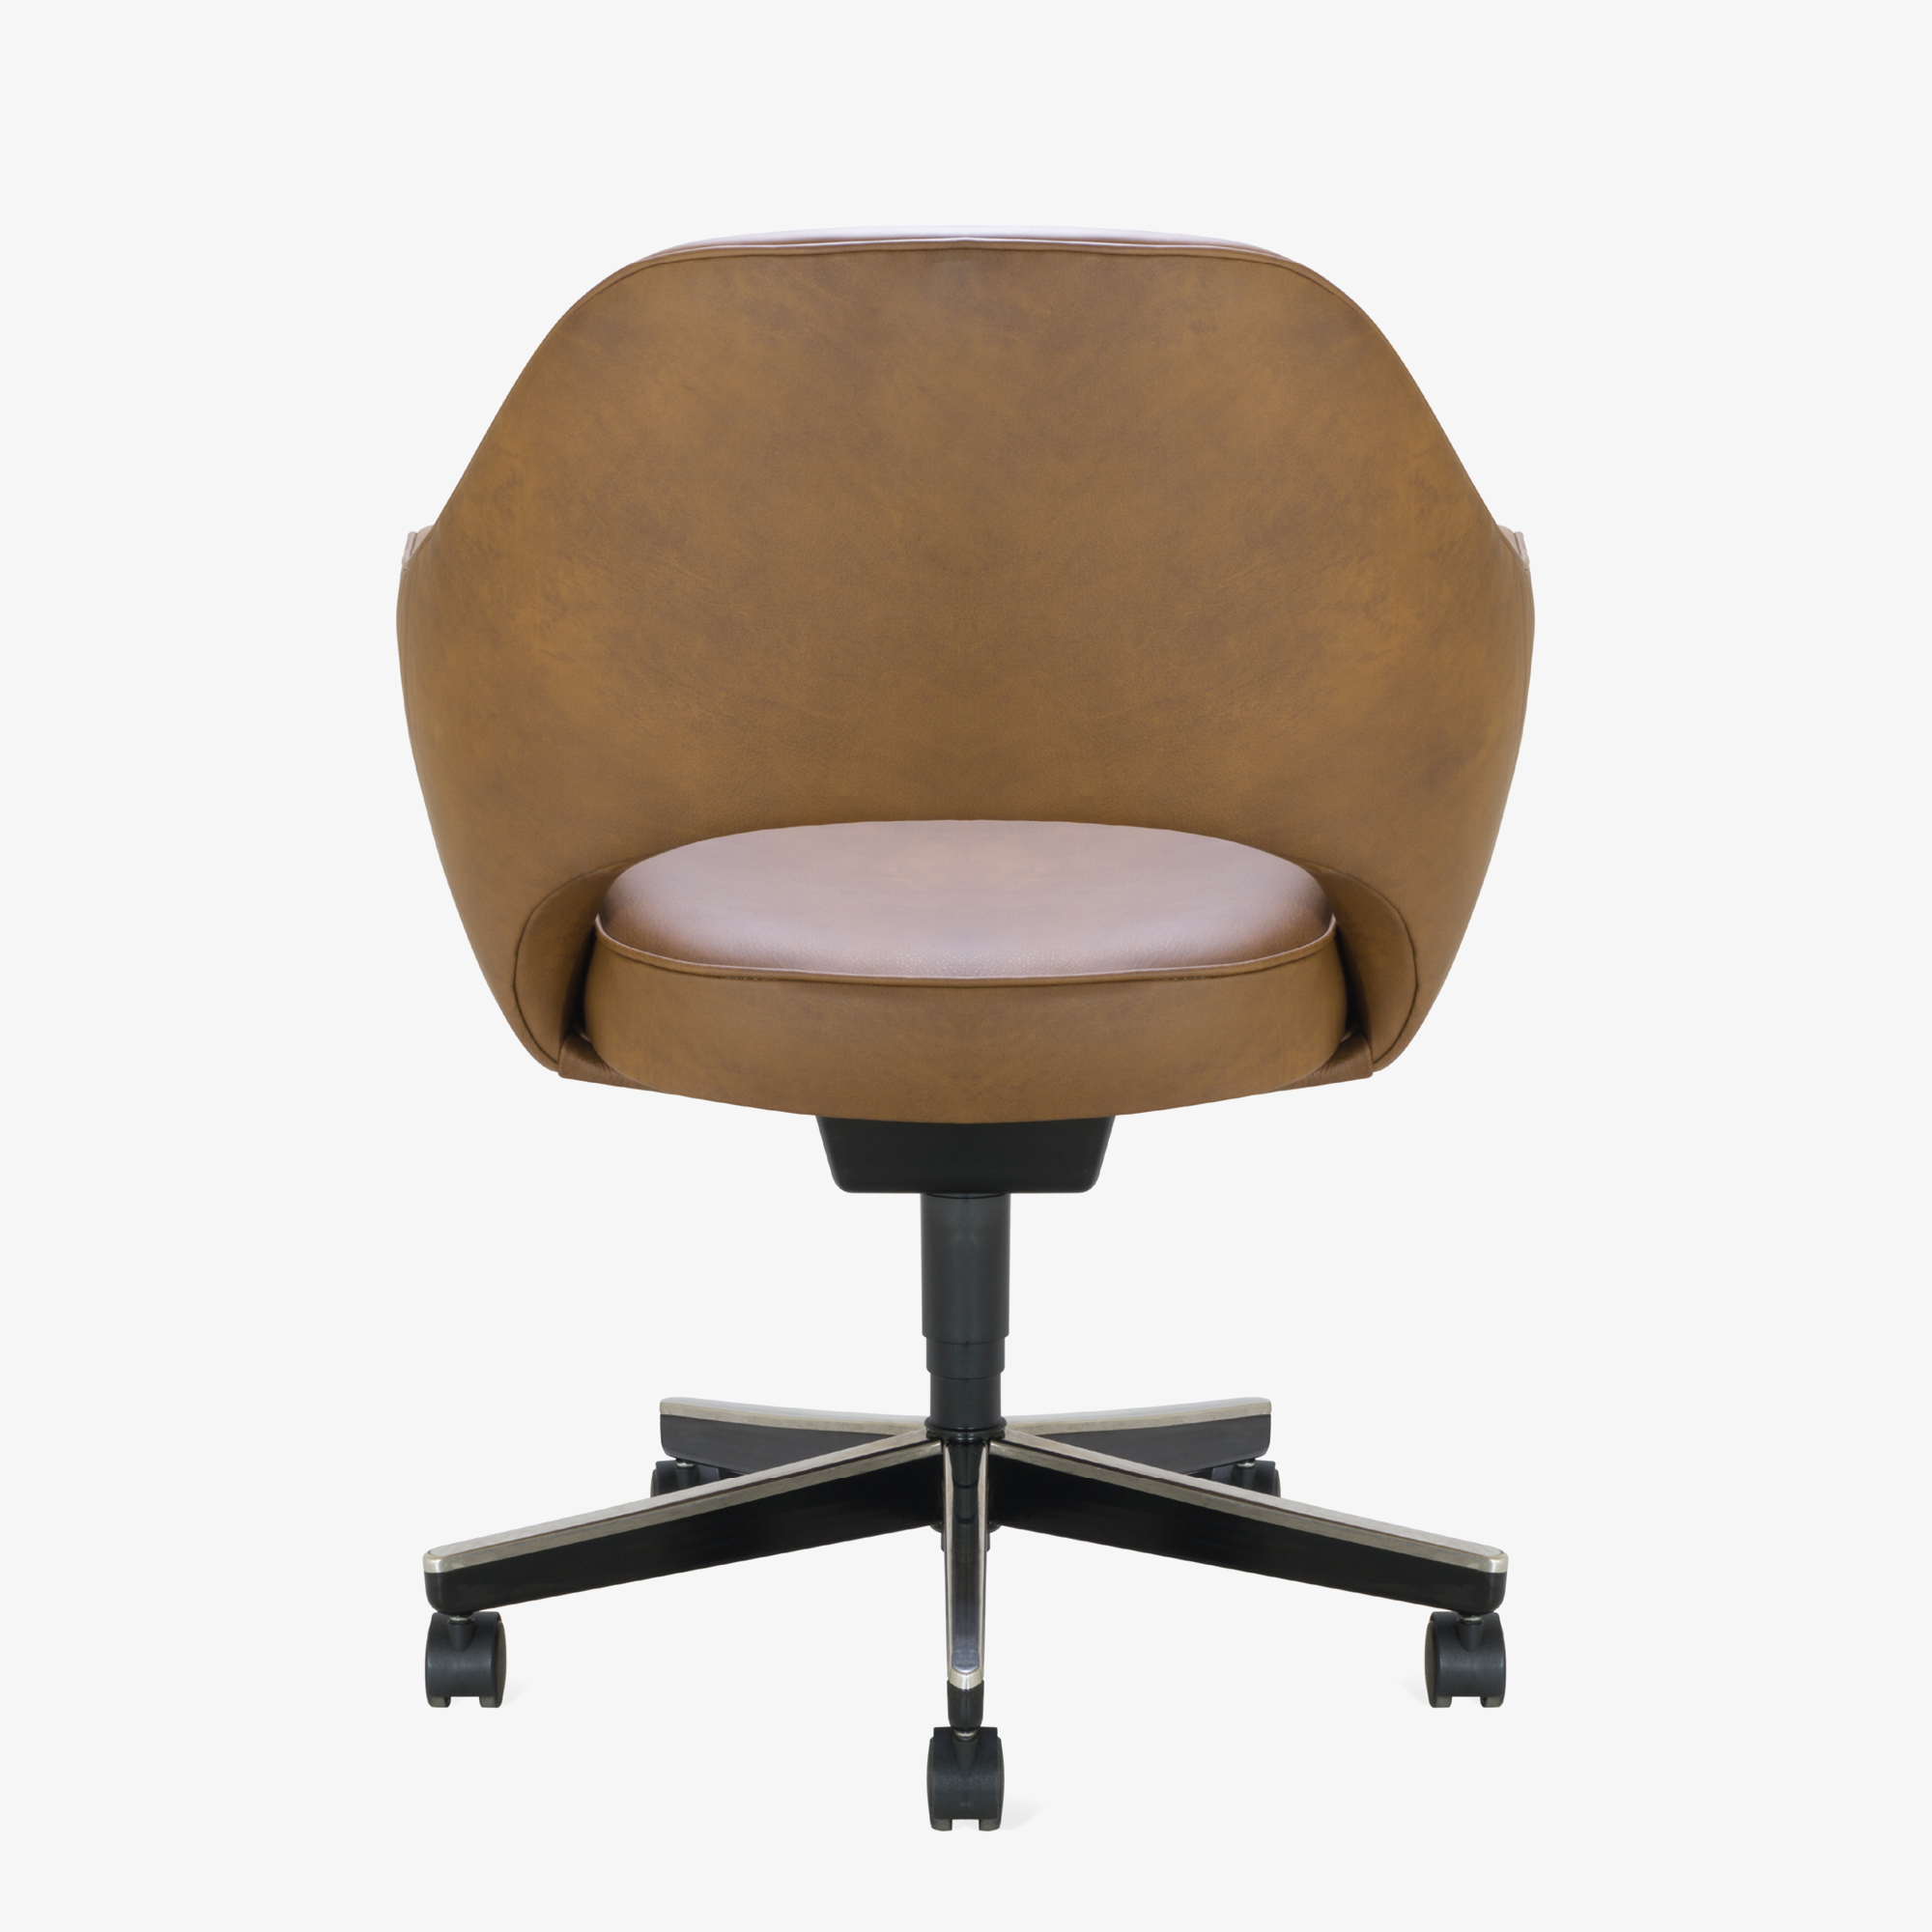 Saarinen Executive Arm Chair in Saddle Leather, Swivel Base5.png